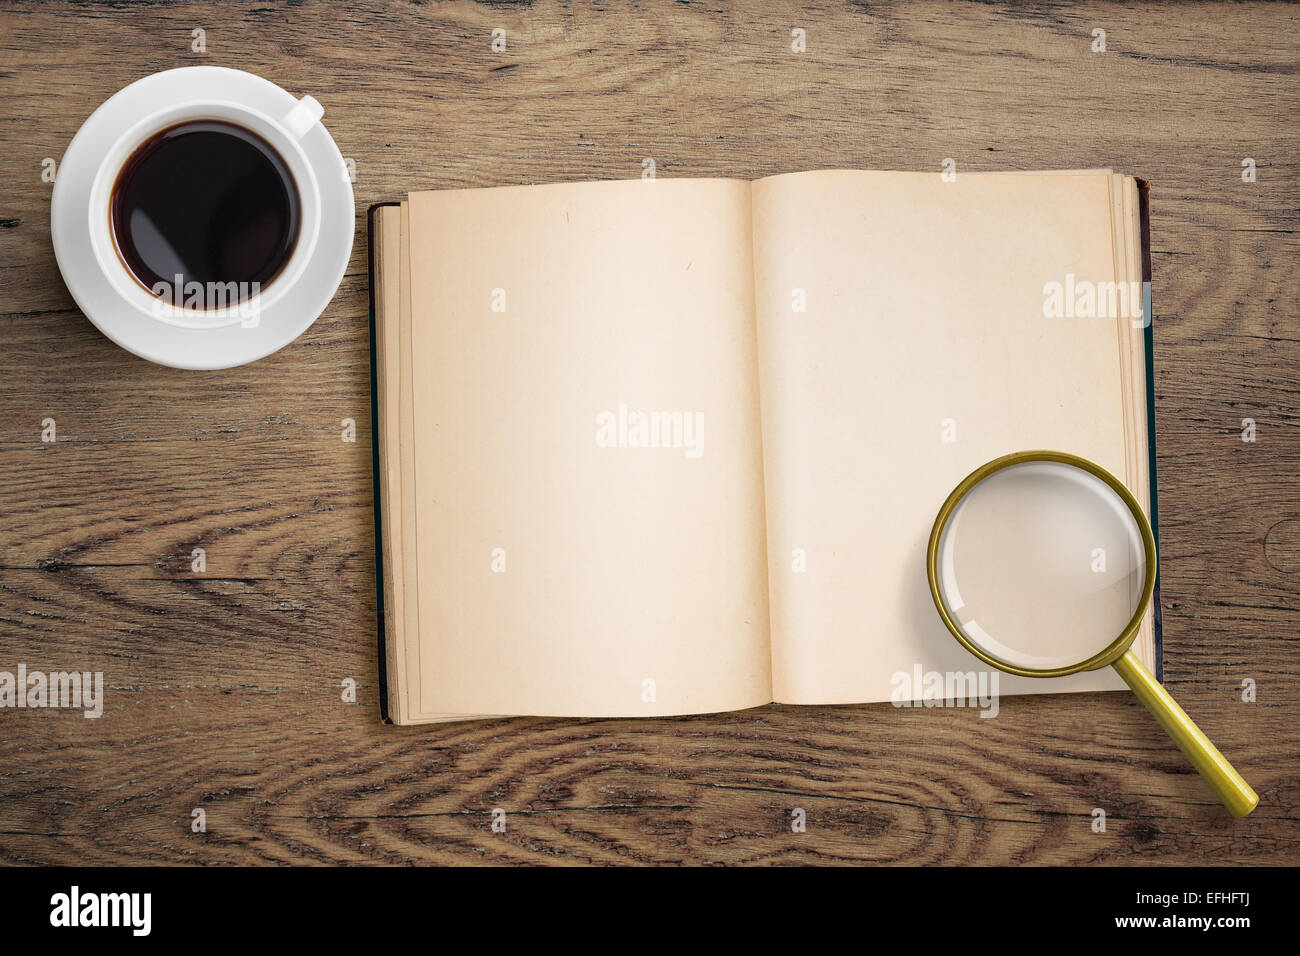 Diary or open book with loupe and coffee cup. Stock Photo